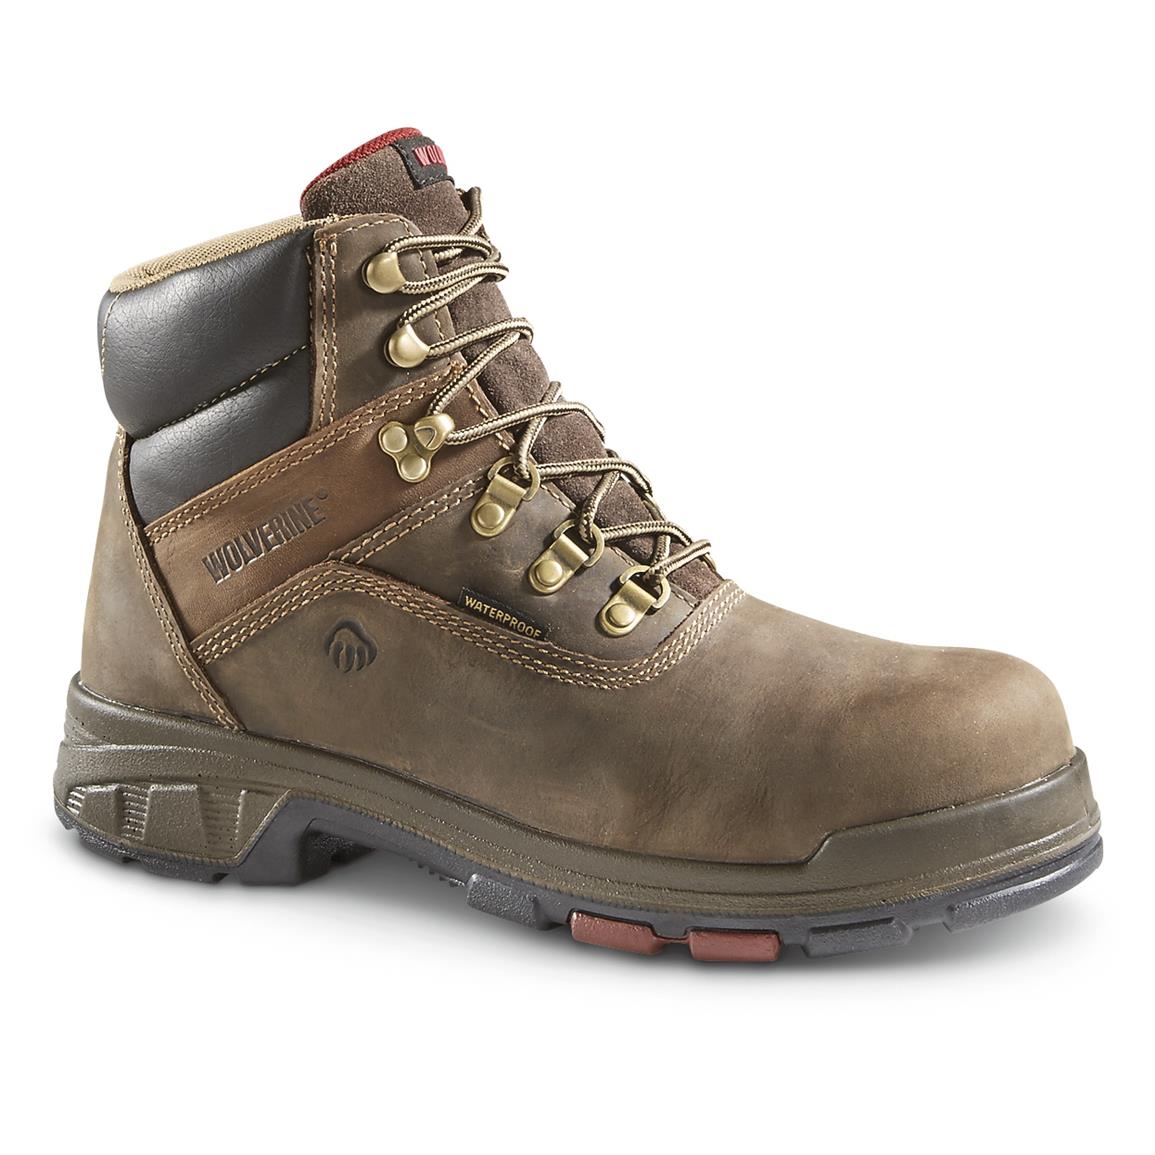 Wolverine Cabor EPX Work Boots - 647983, Work Boots at Sportsman's Guide